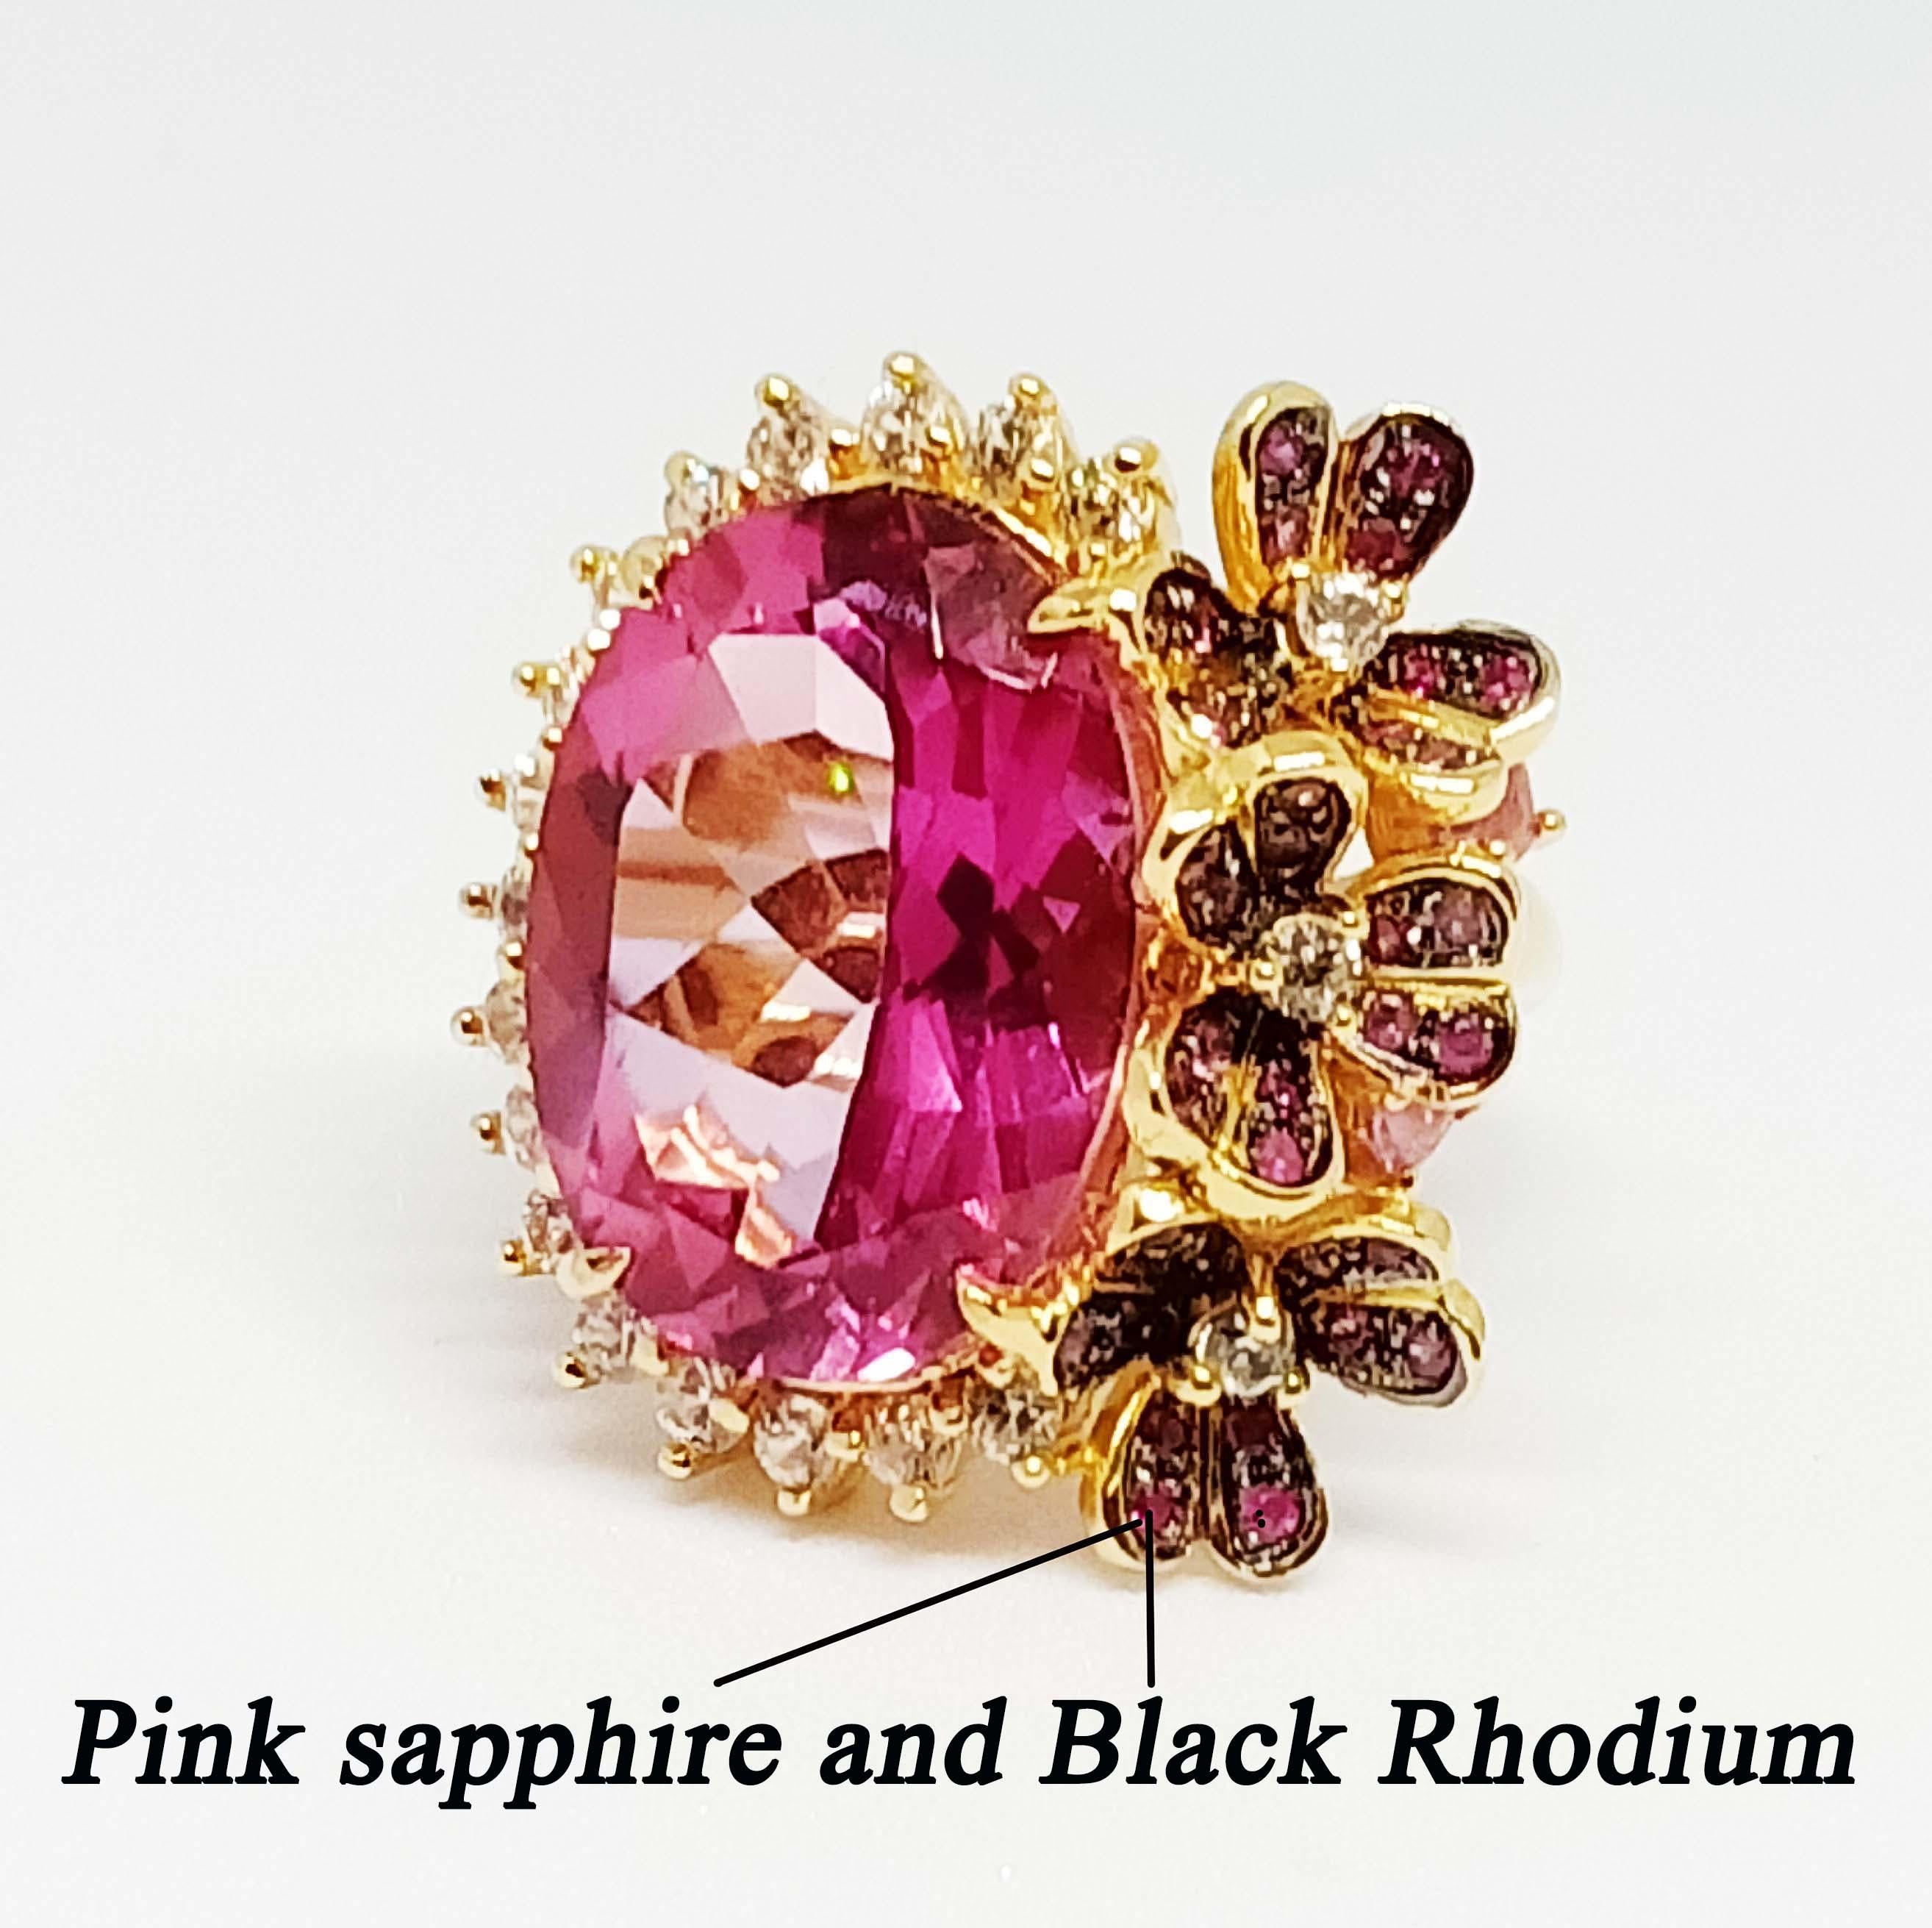 Oval Cut (Big Ring) Pink topaz (14.92cts) 18K gold plated on Sterling Silver For Sale